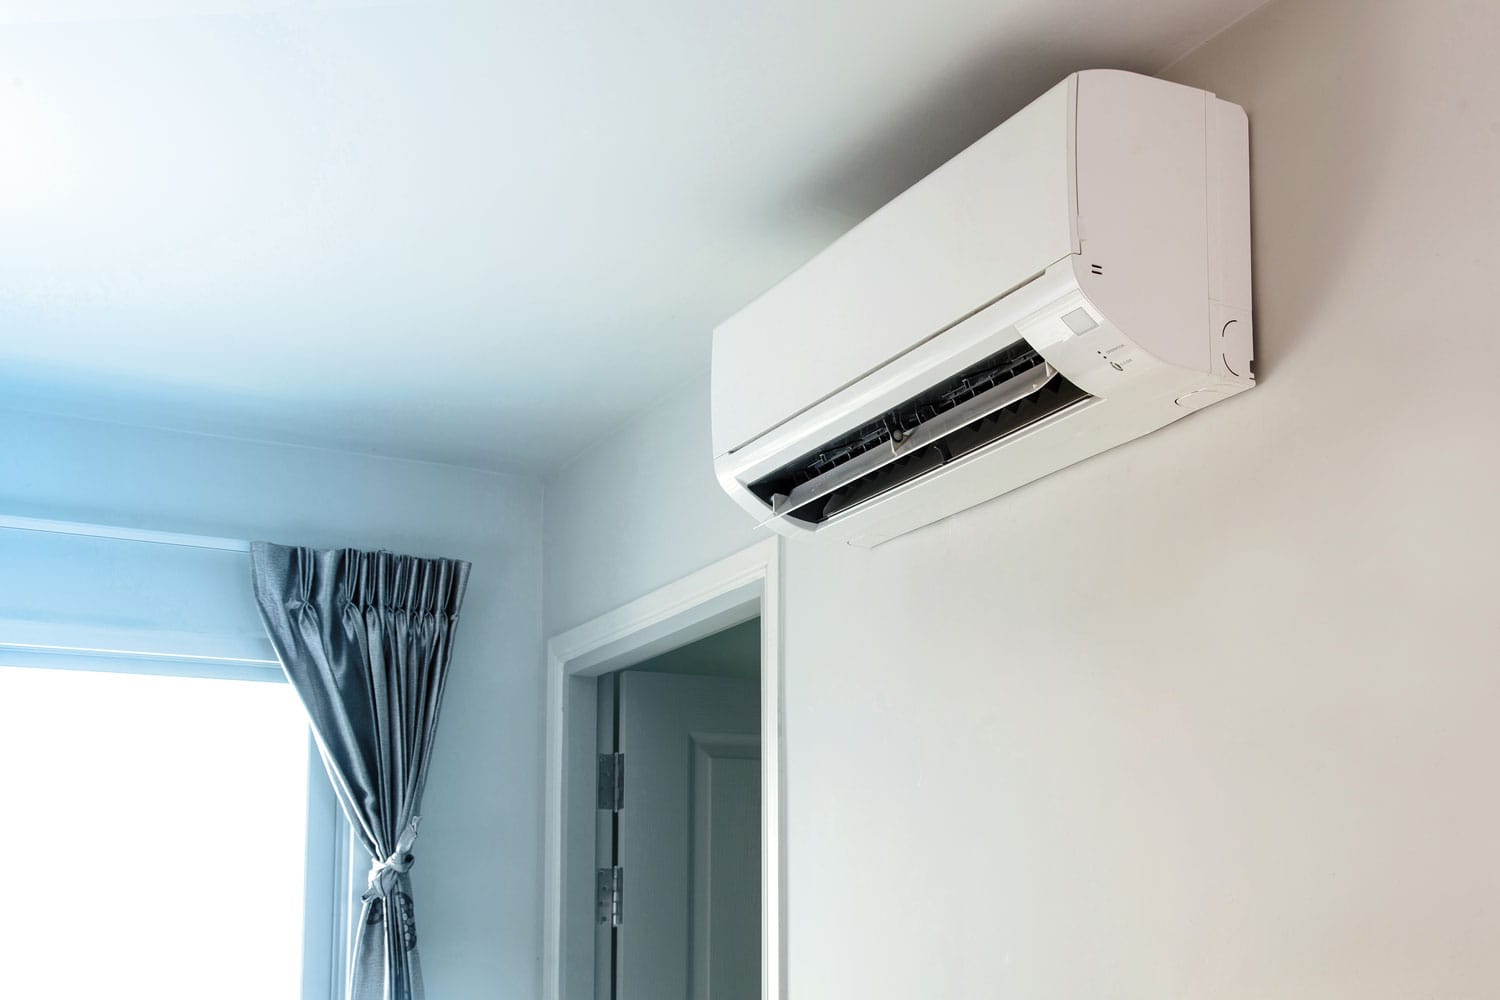 A mini split AC unit mounted on the living room wall